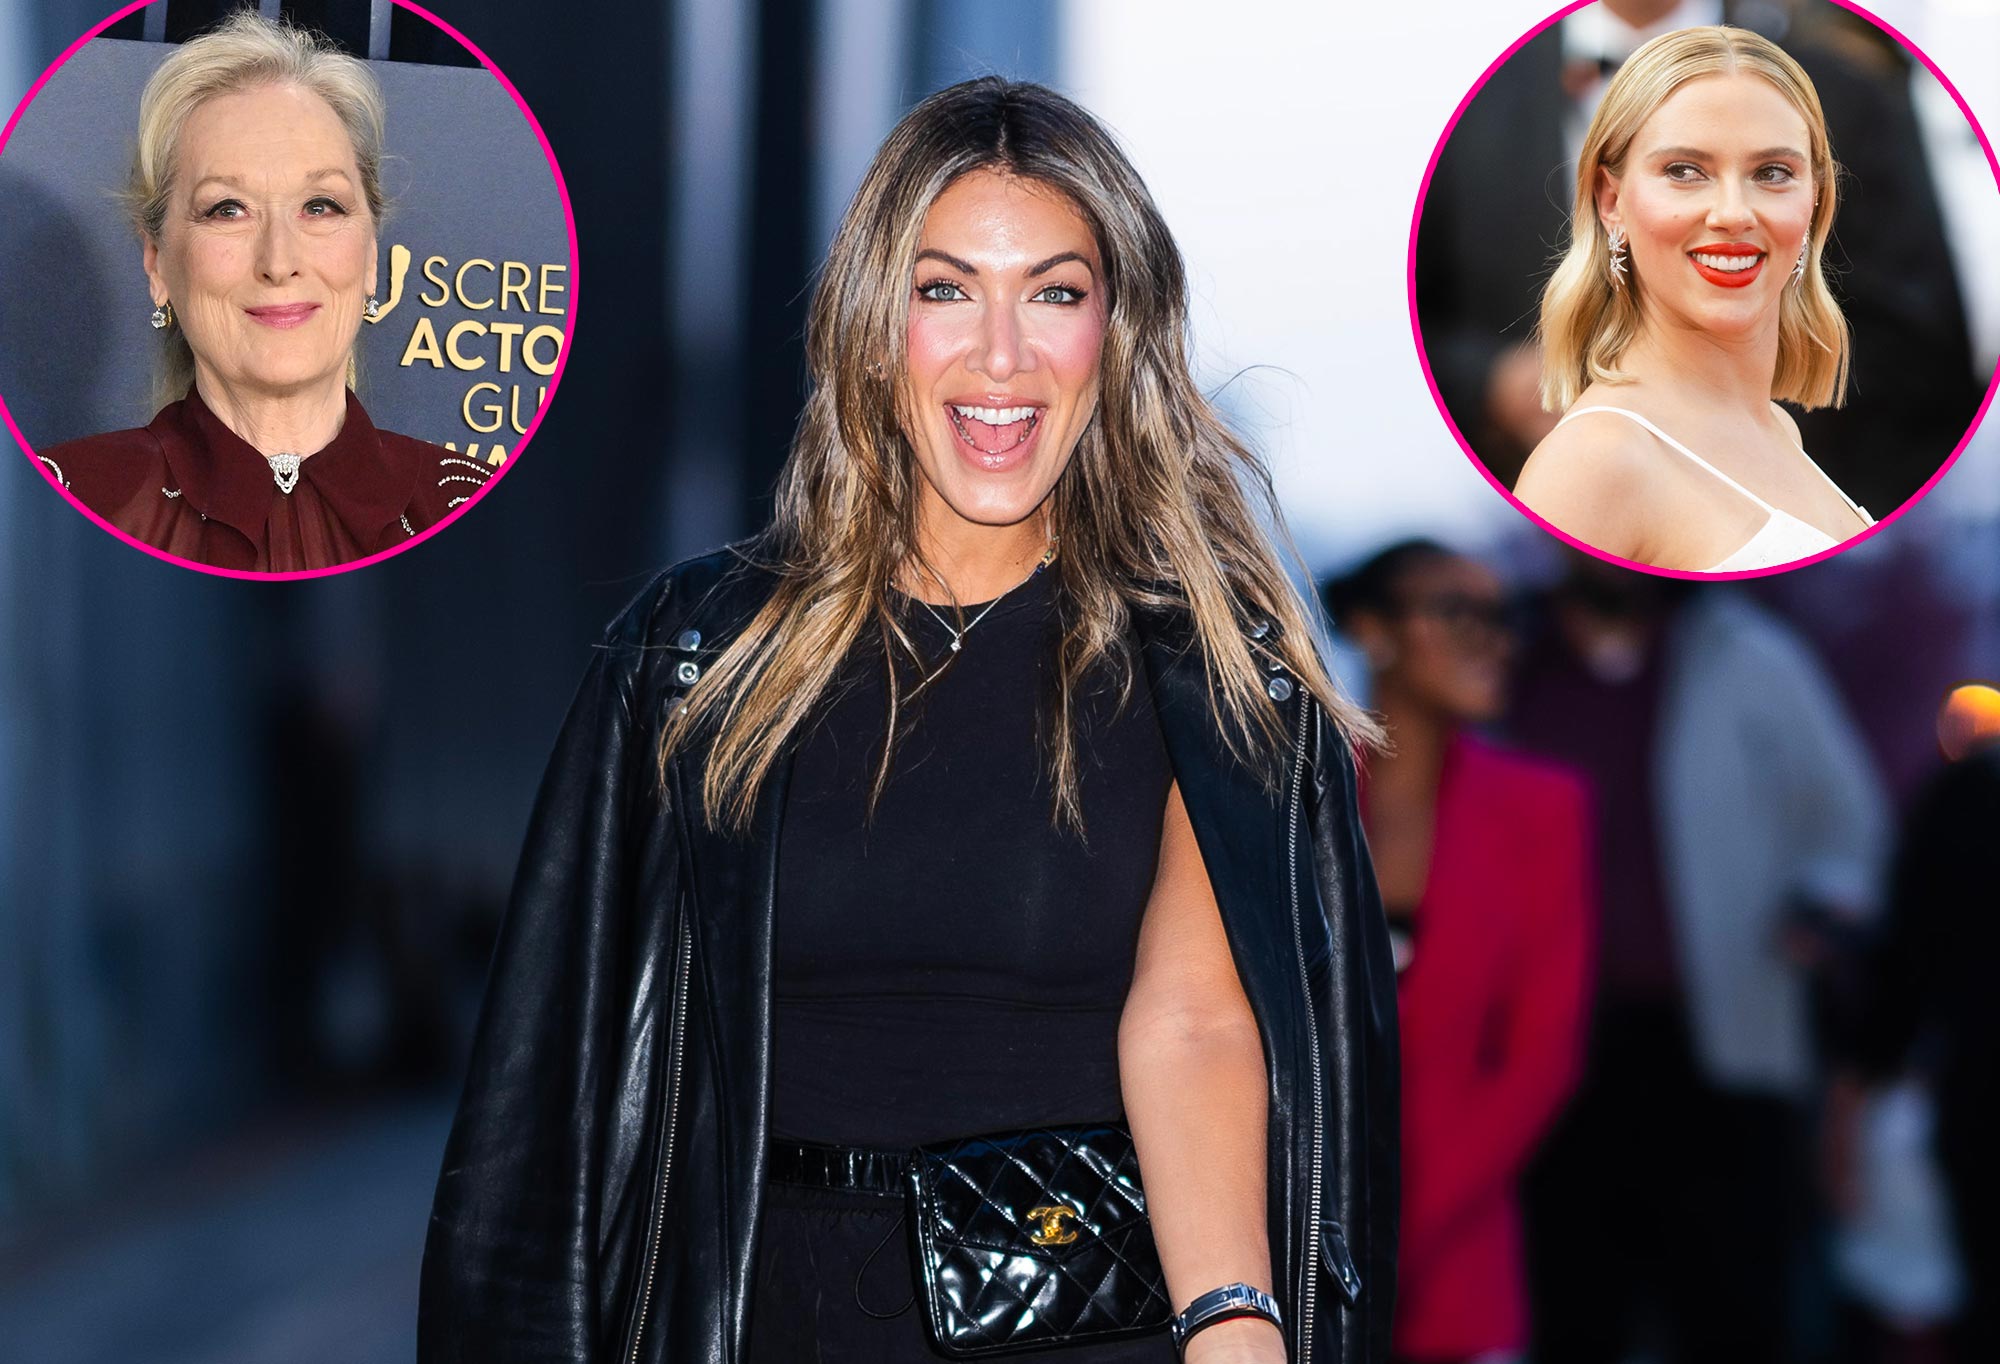 RHONY s Erin Lichy Has Surprising Connections to Meryl Streep and Scarlett Johansson 606